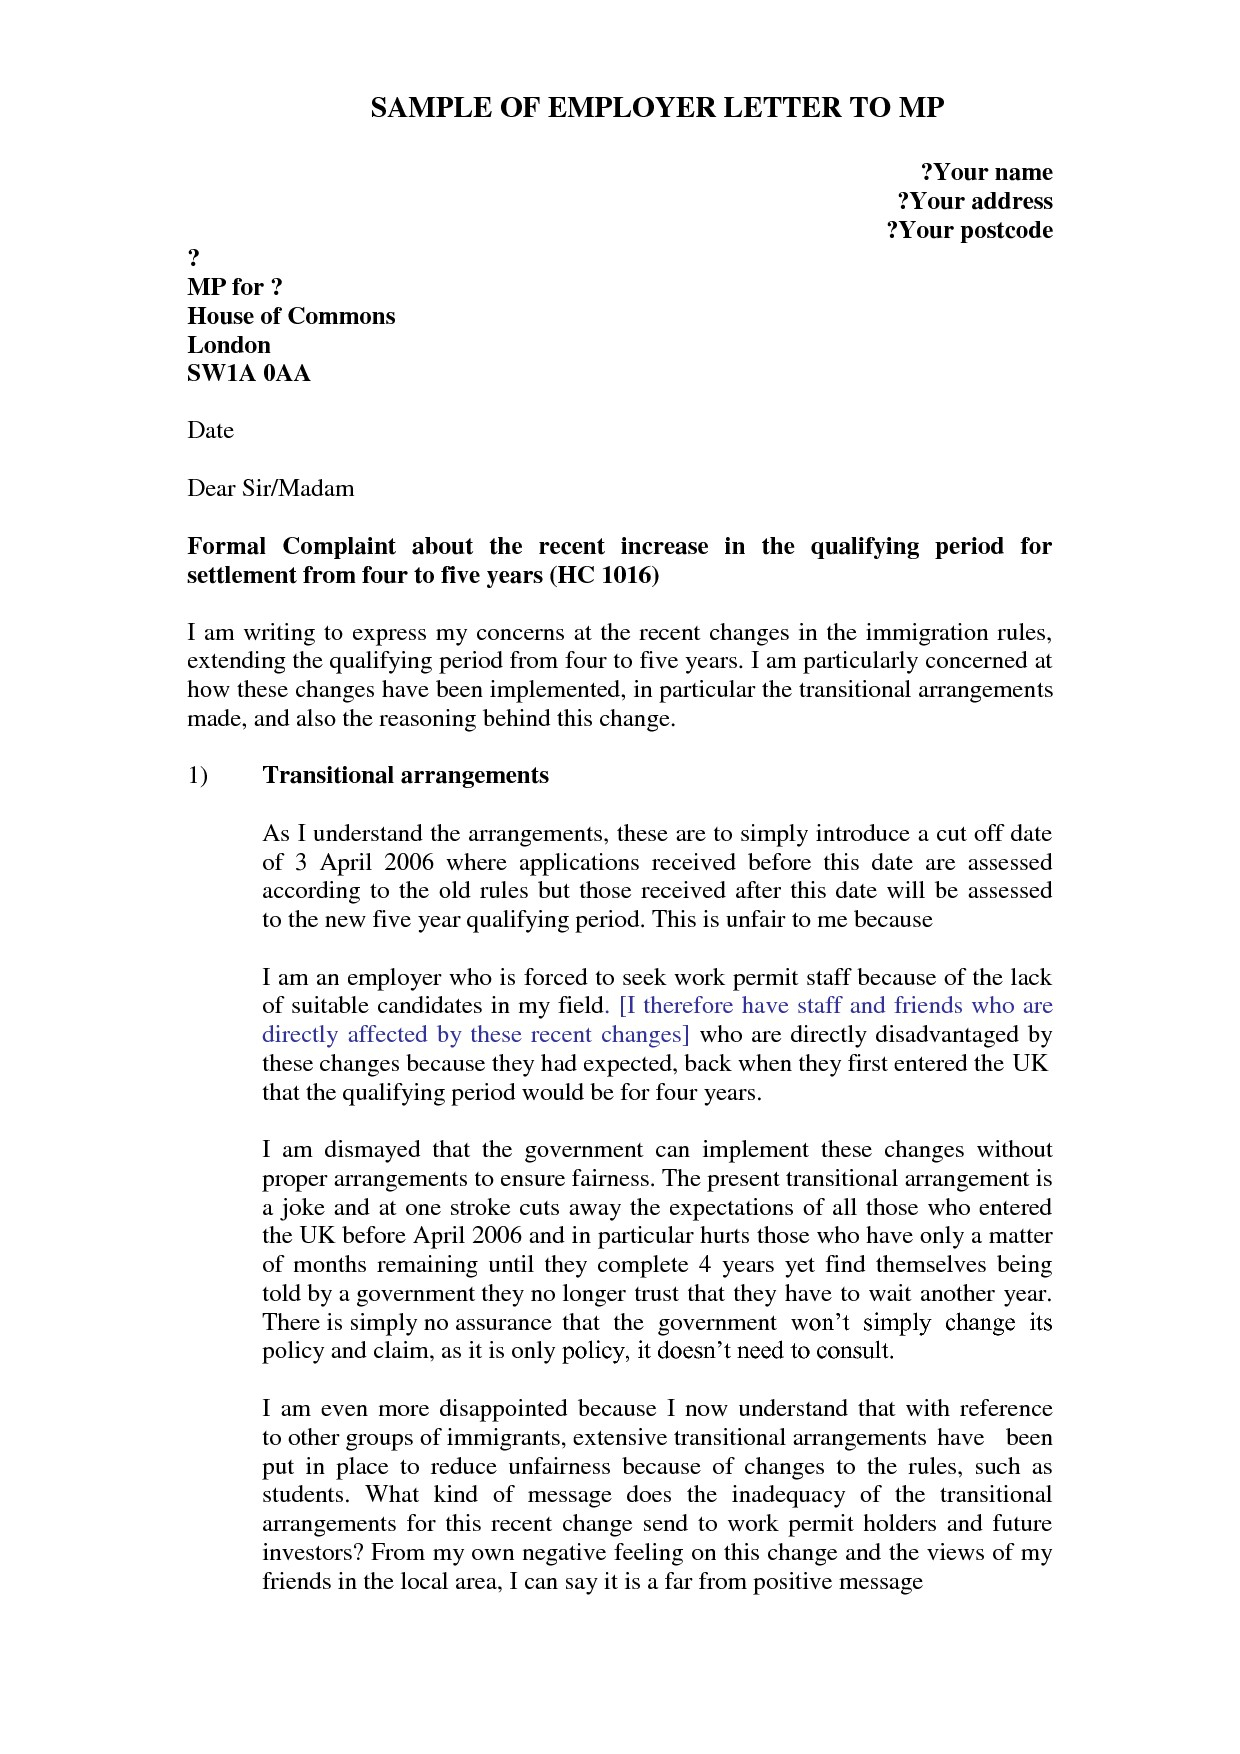 How to Write A formal Grievance Letter Template - formal Letter Plaint to Employer Template